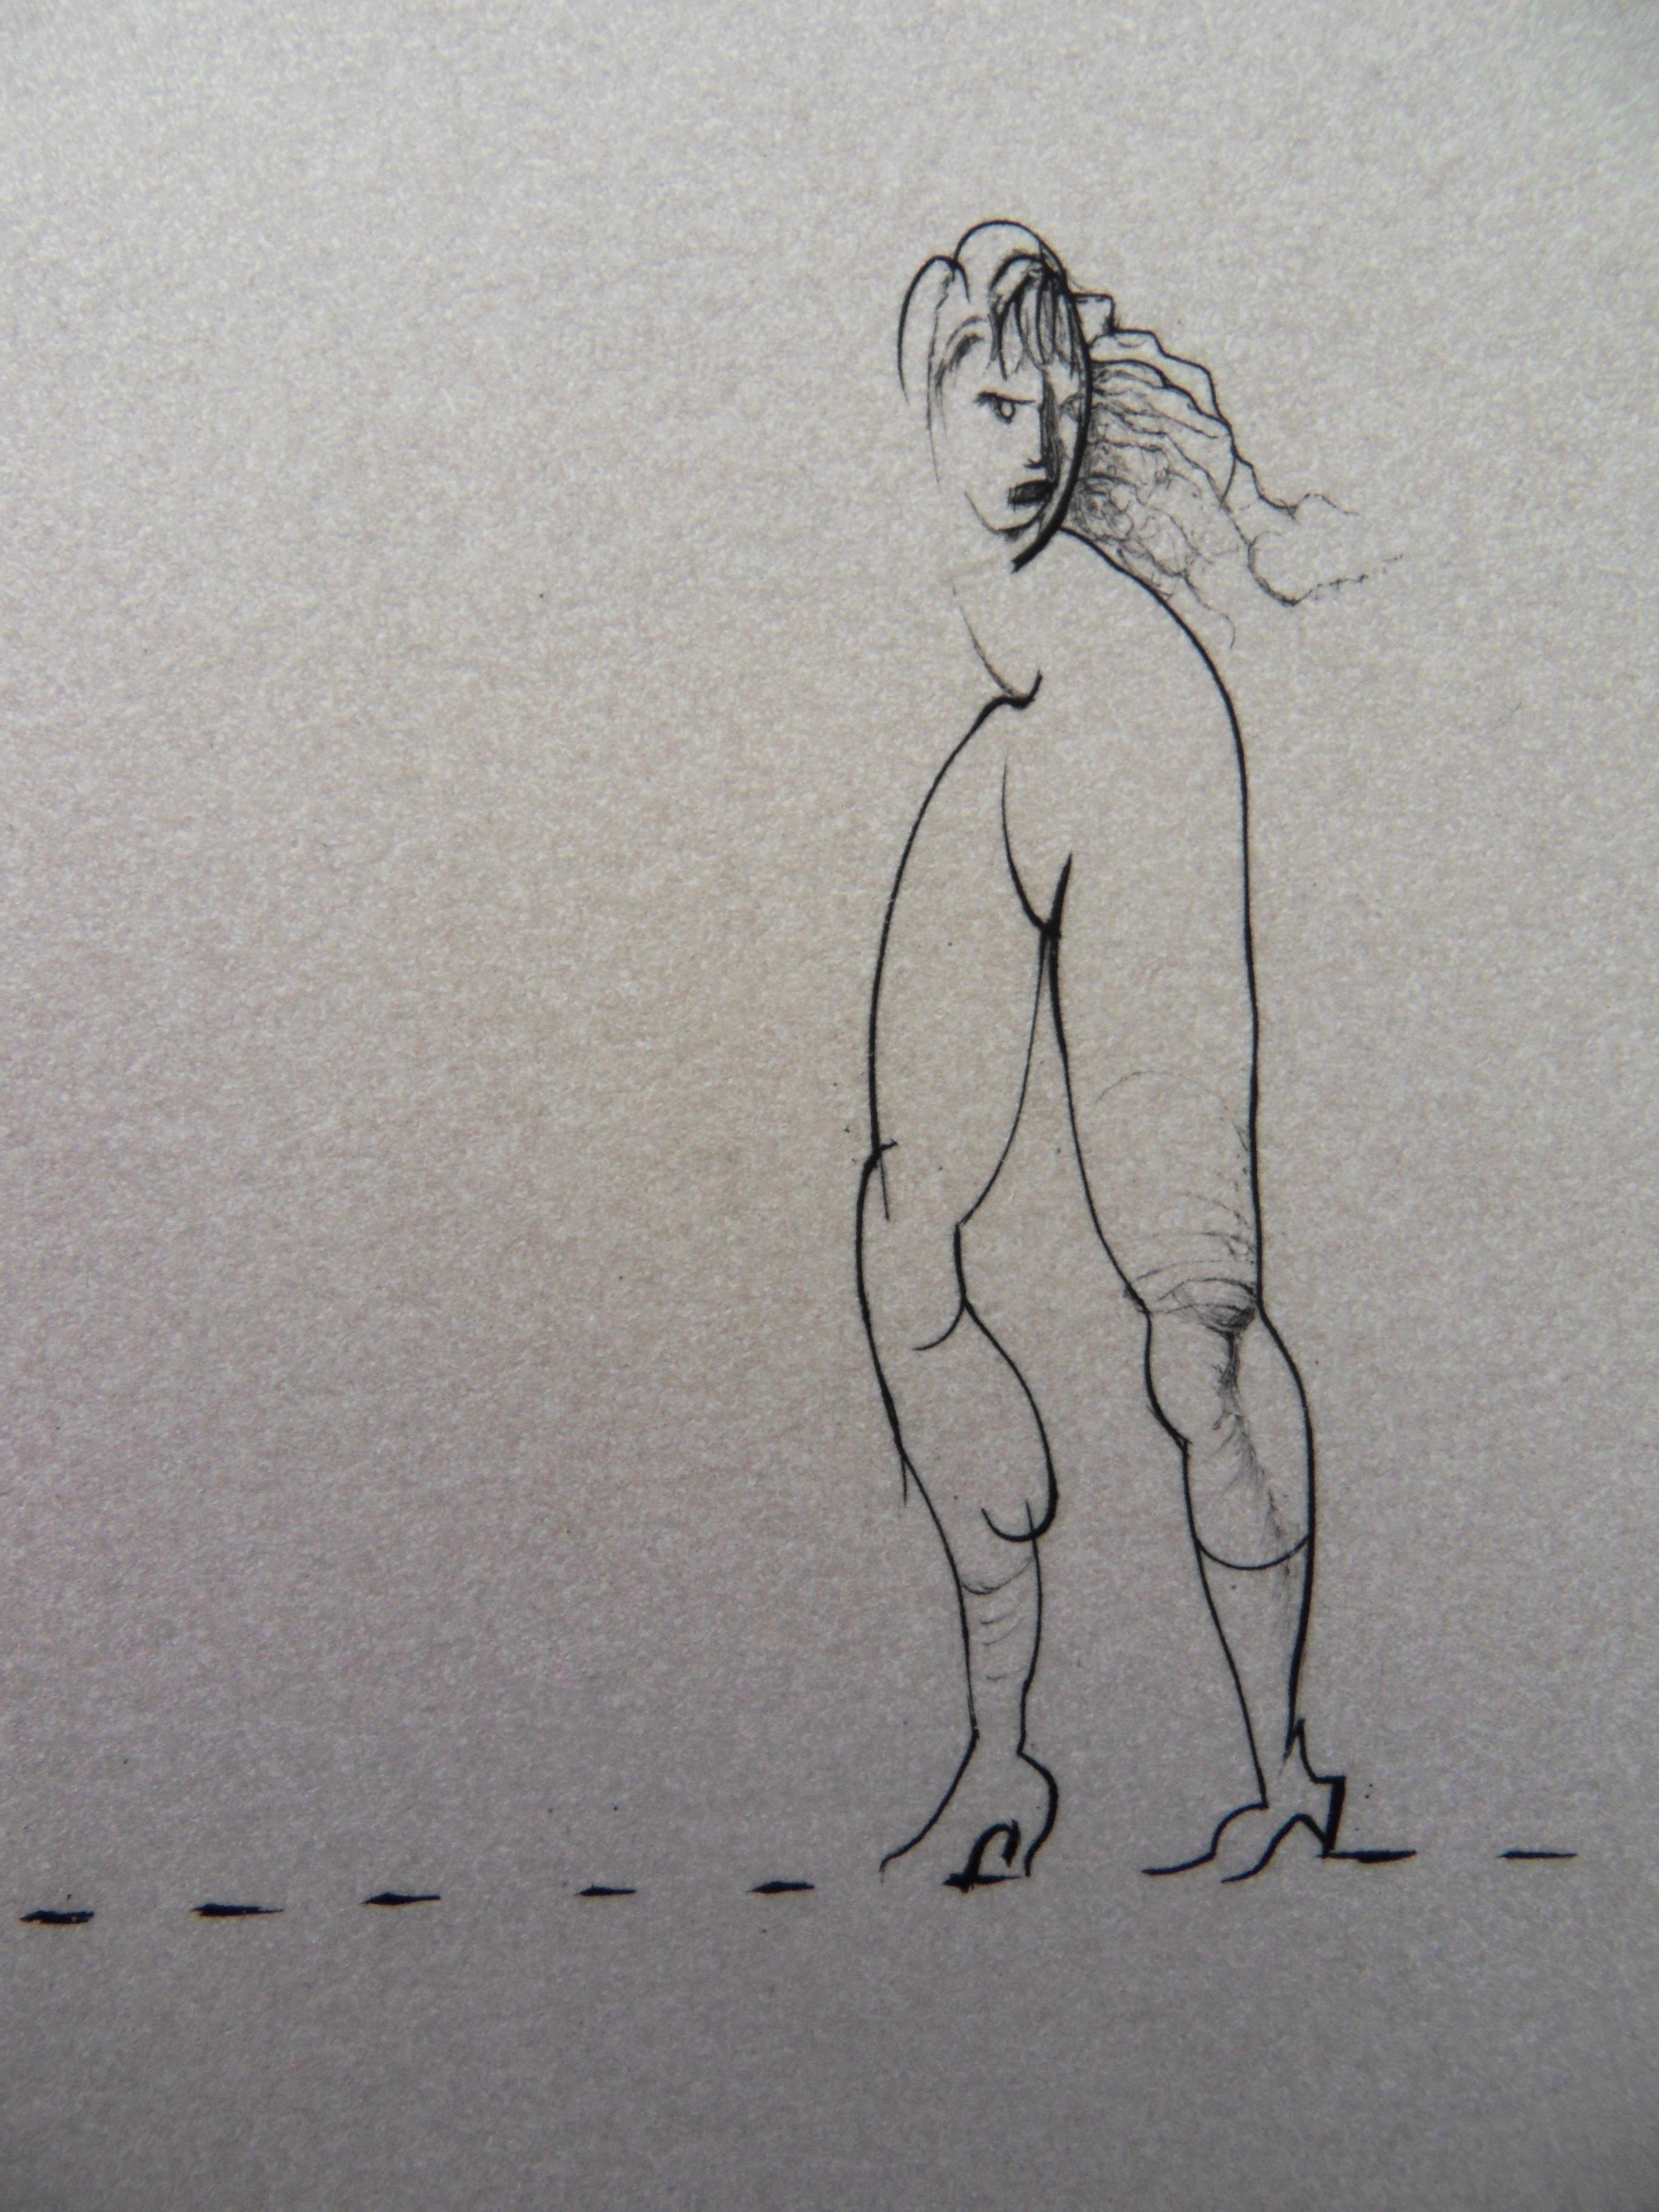 The Staring Woman - Original Etching Handsigned, Numbered - Surrealist Print by Hans Bellmer